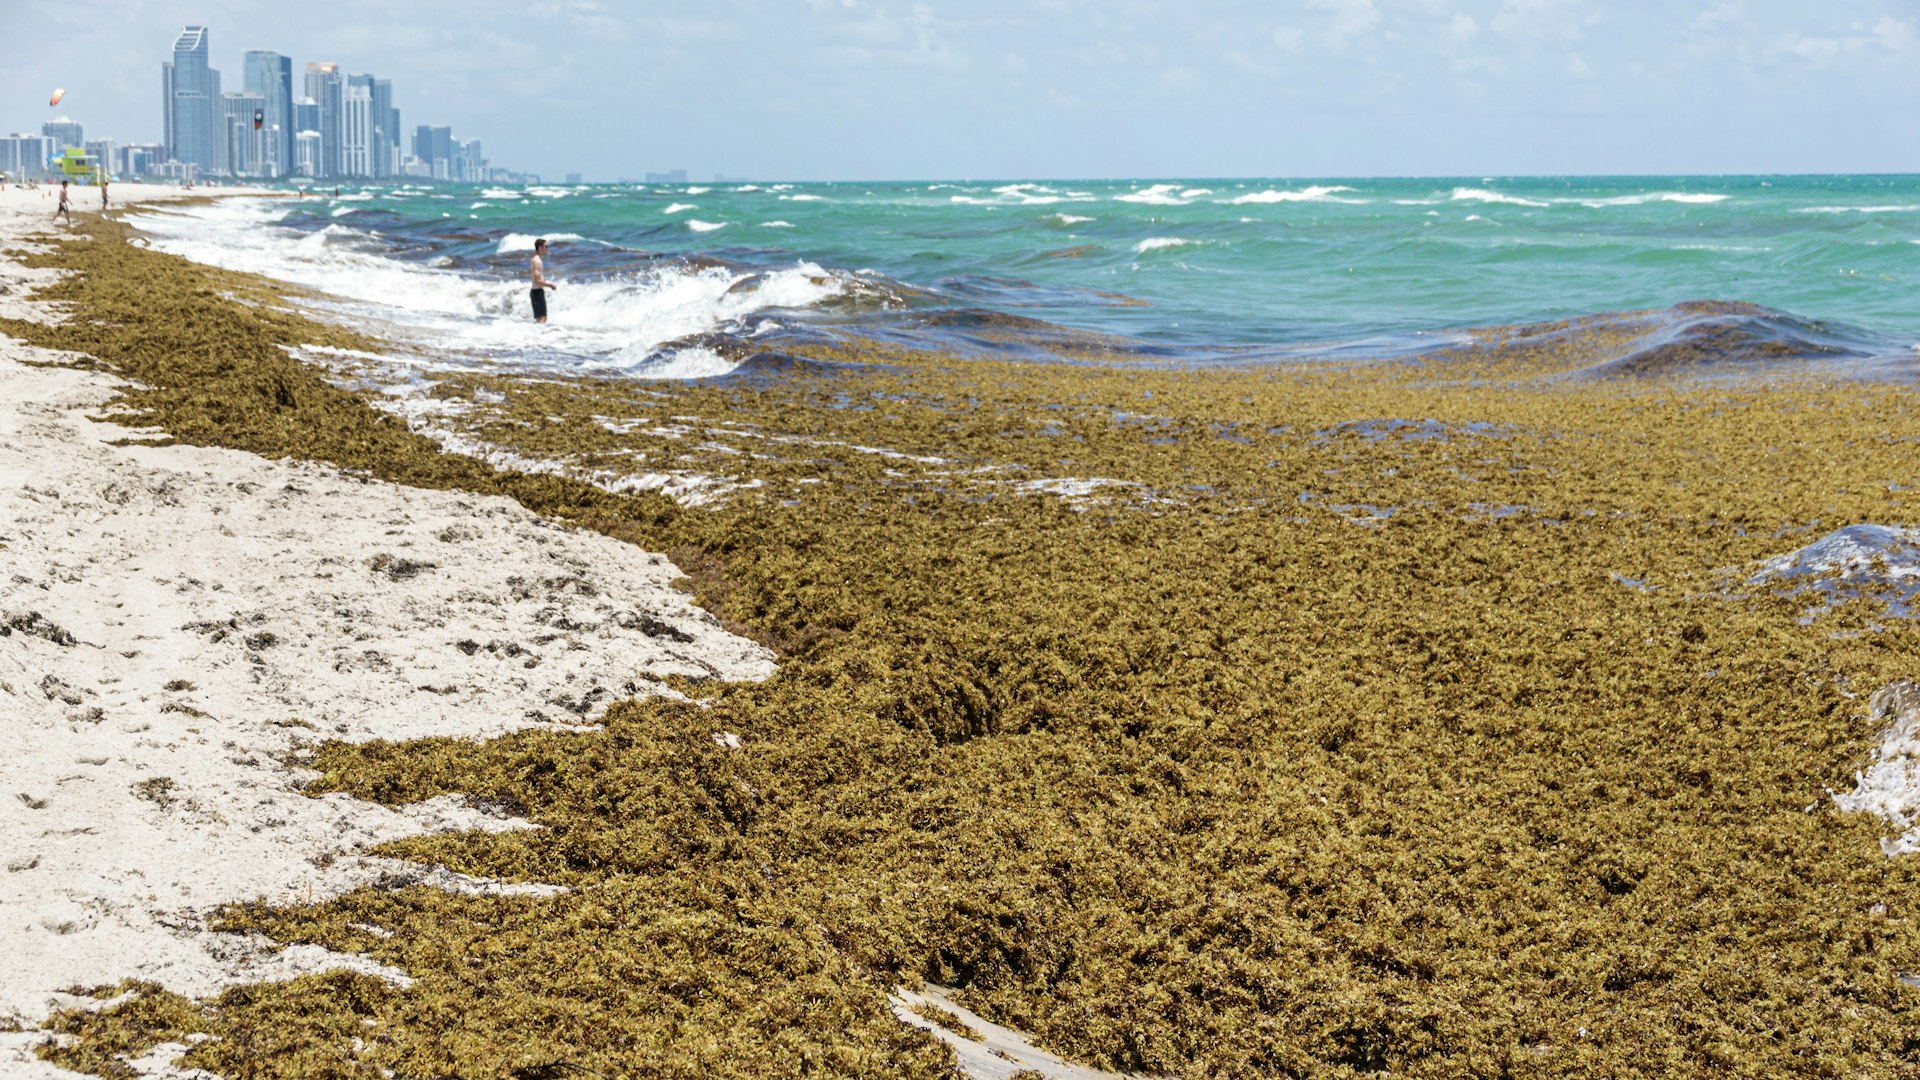 Clumps of sargassum seaweed on the beach in Miami, Florida, USA